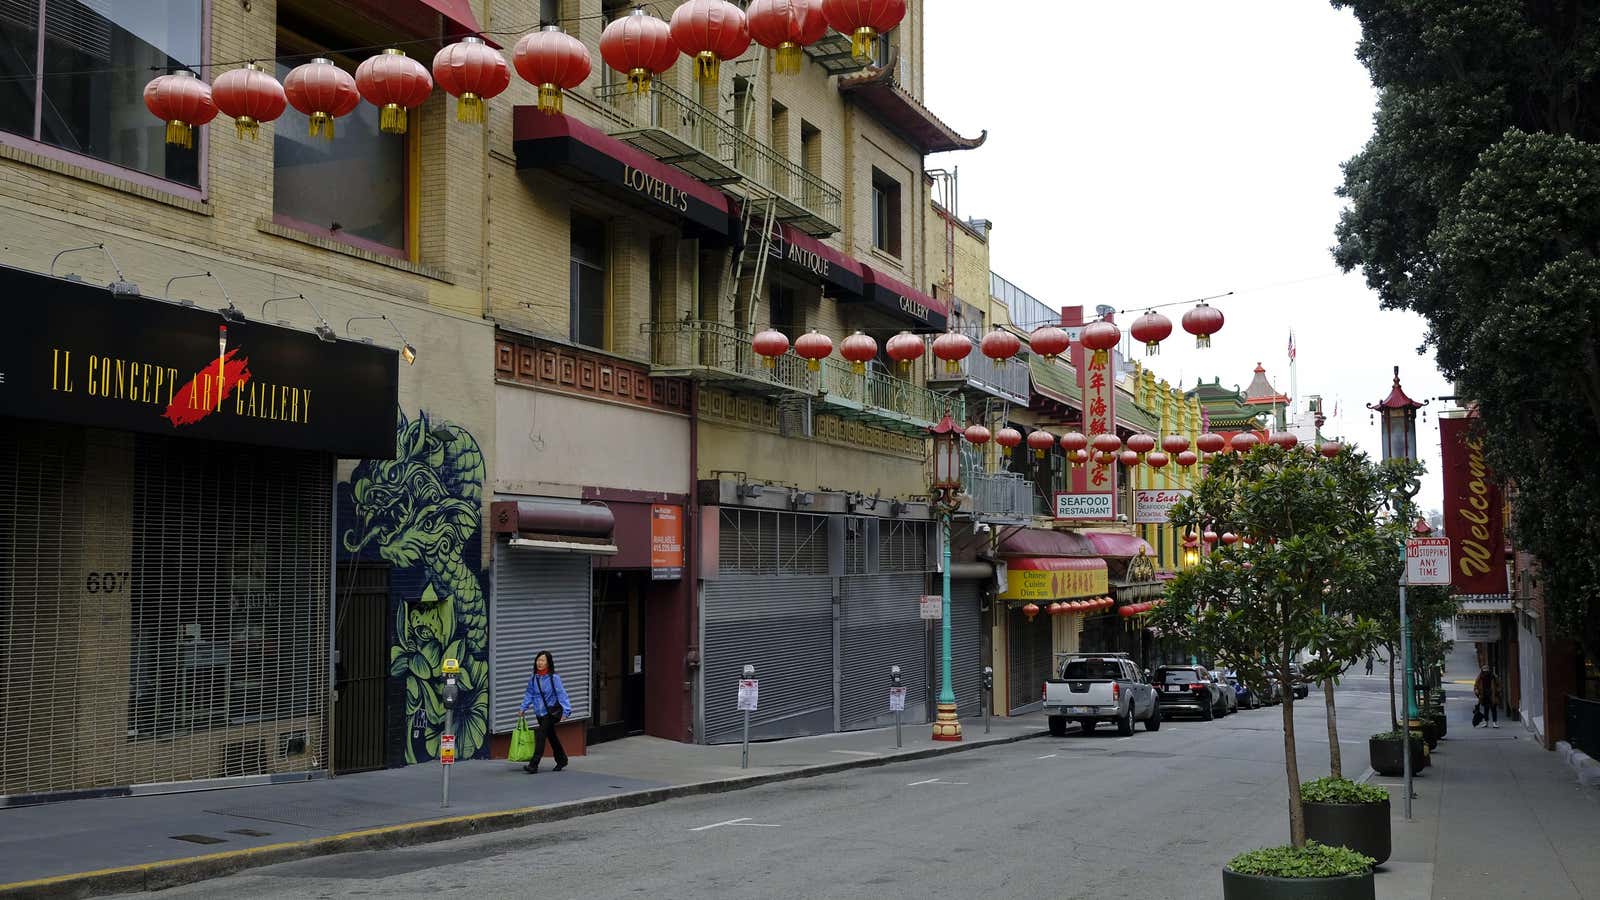 Notoriously crowded Chinatown neighborhoods across the US have been mostly desolate since the coronavirus outbreak.